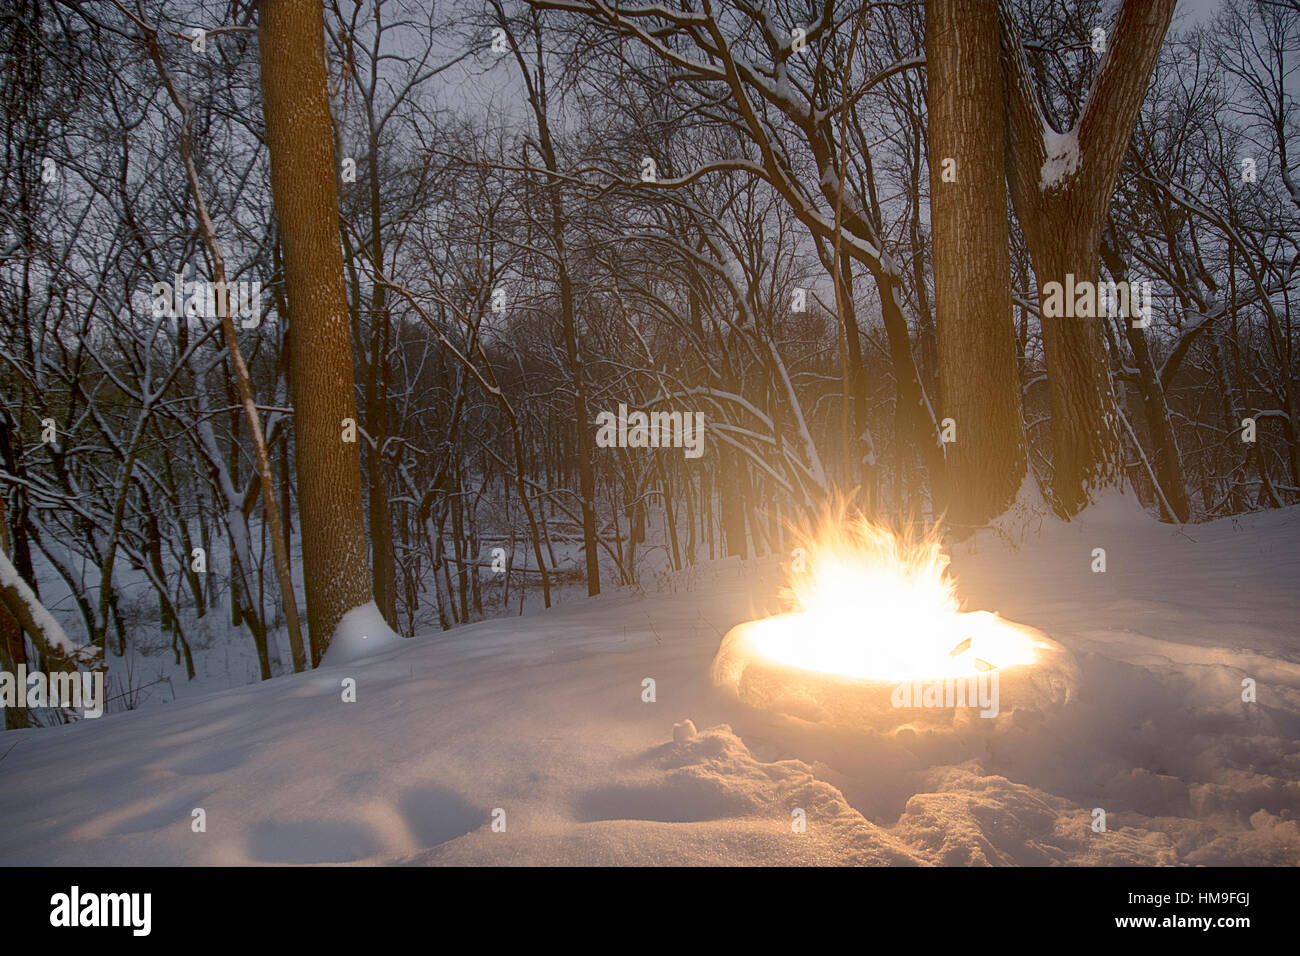 Burning hot fire surrounded by snow in wooded area. Stock Photo